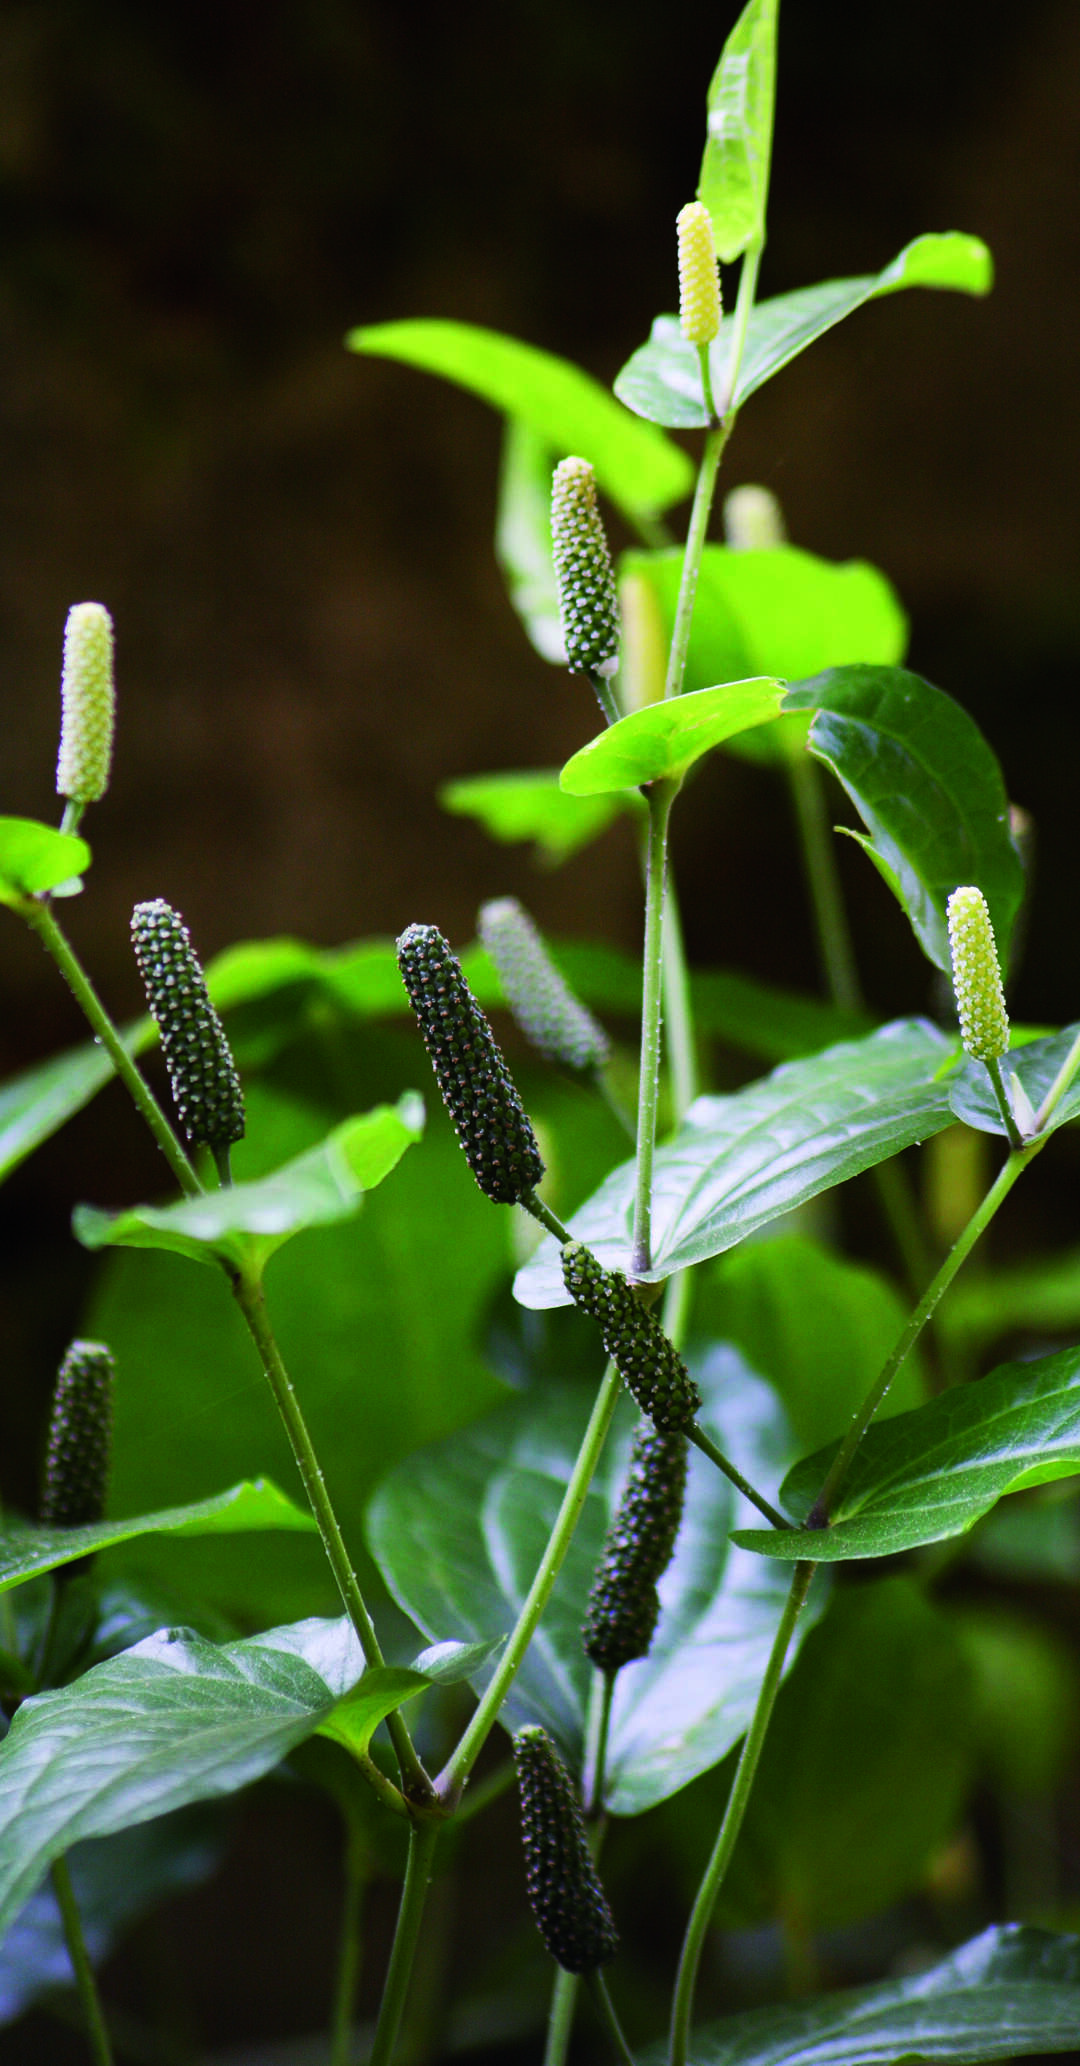 Image of Indian long pepper